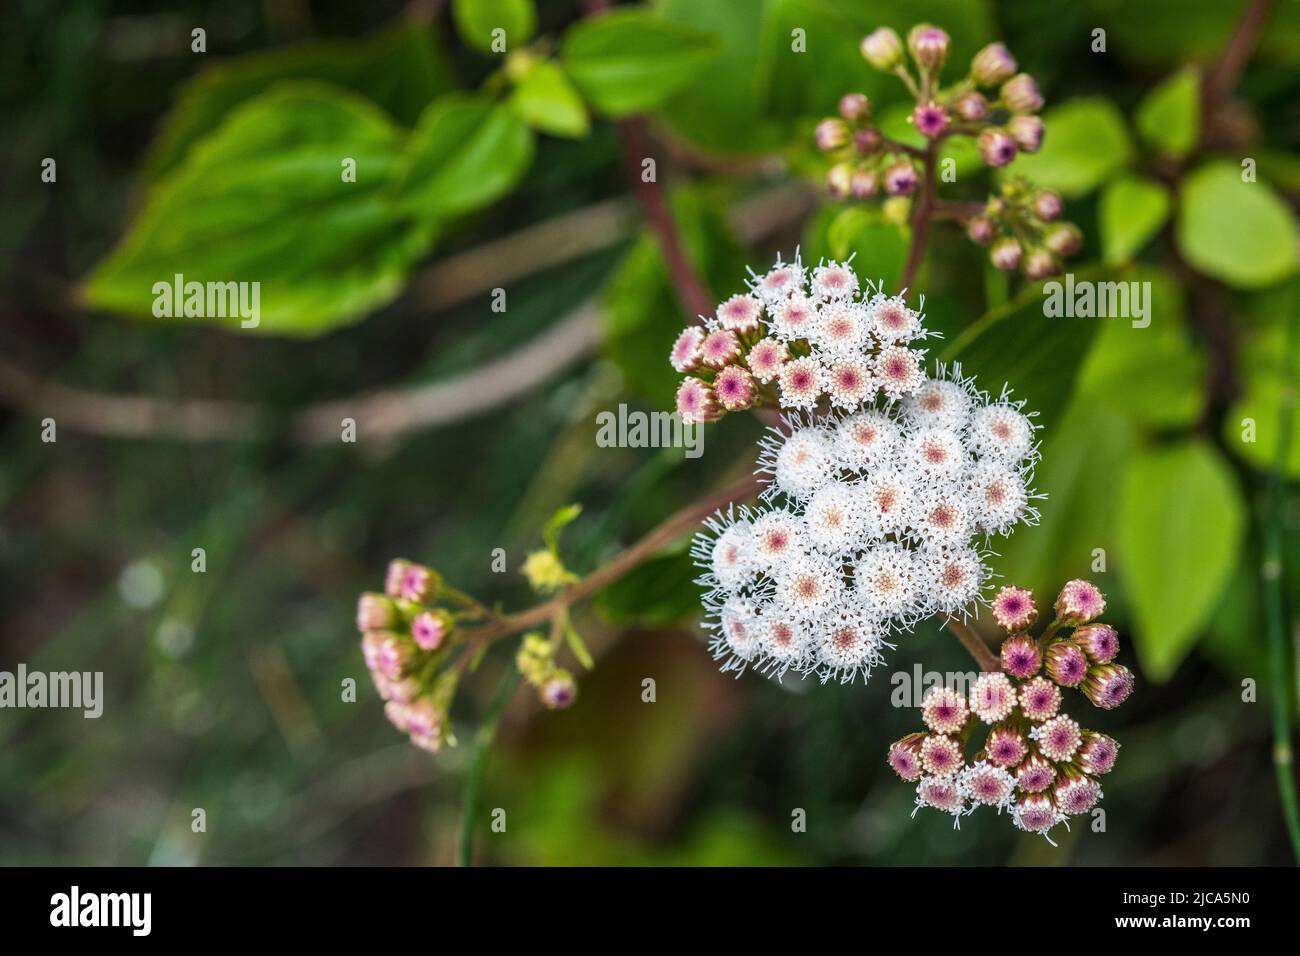 Ageratina adenophora (synonym Eupatorium adenophorum), commonly known as Crofton weed, is a species of flowering plant in the family Asteraceae. Stock Photo